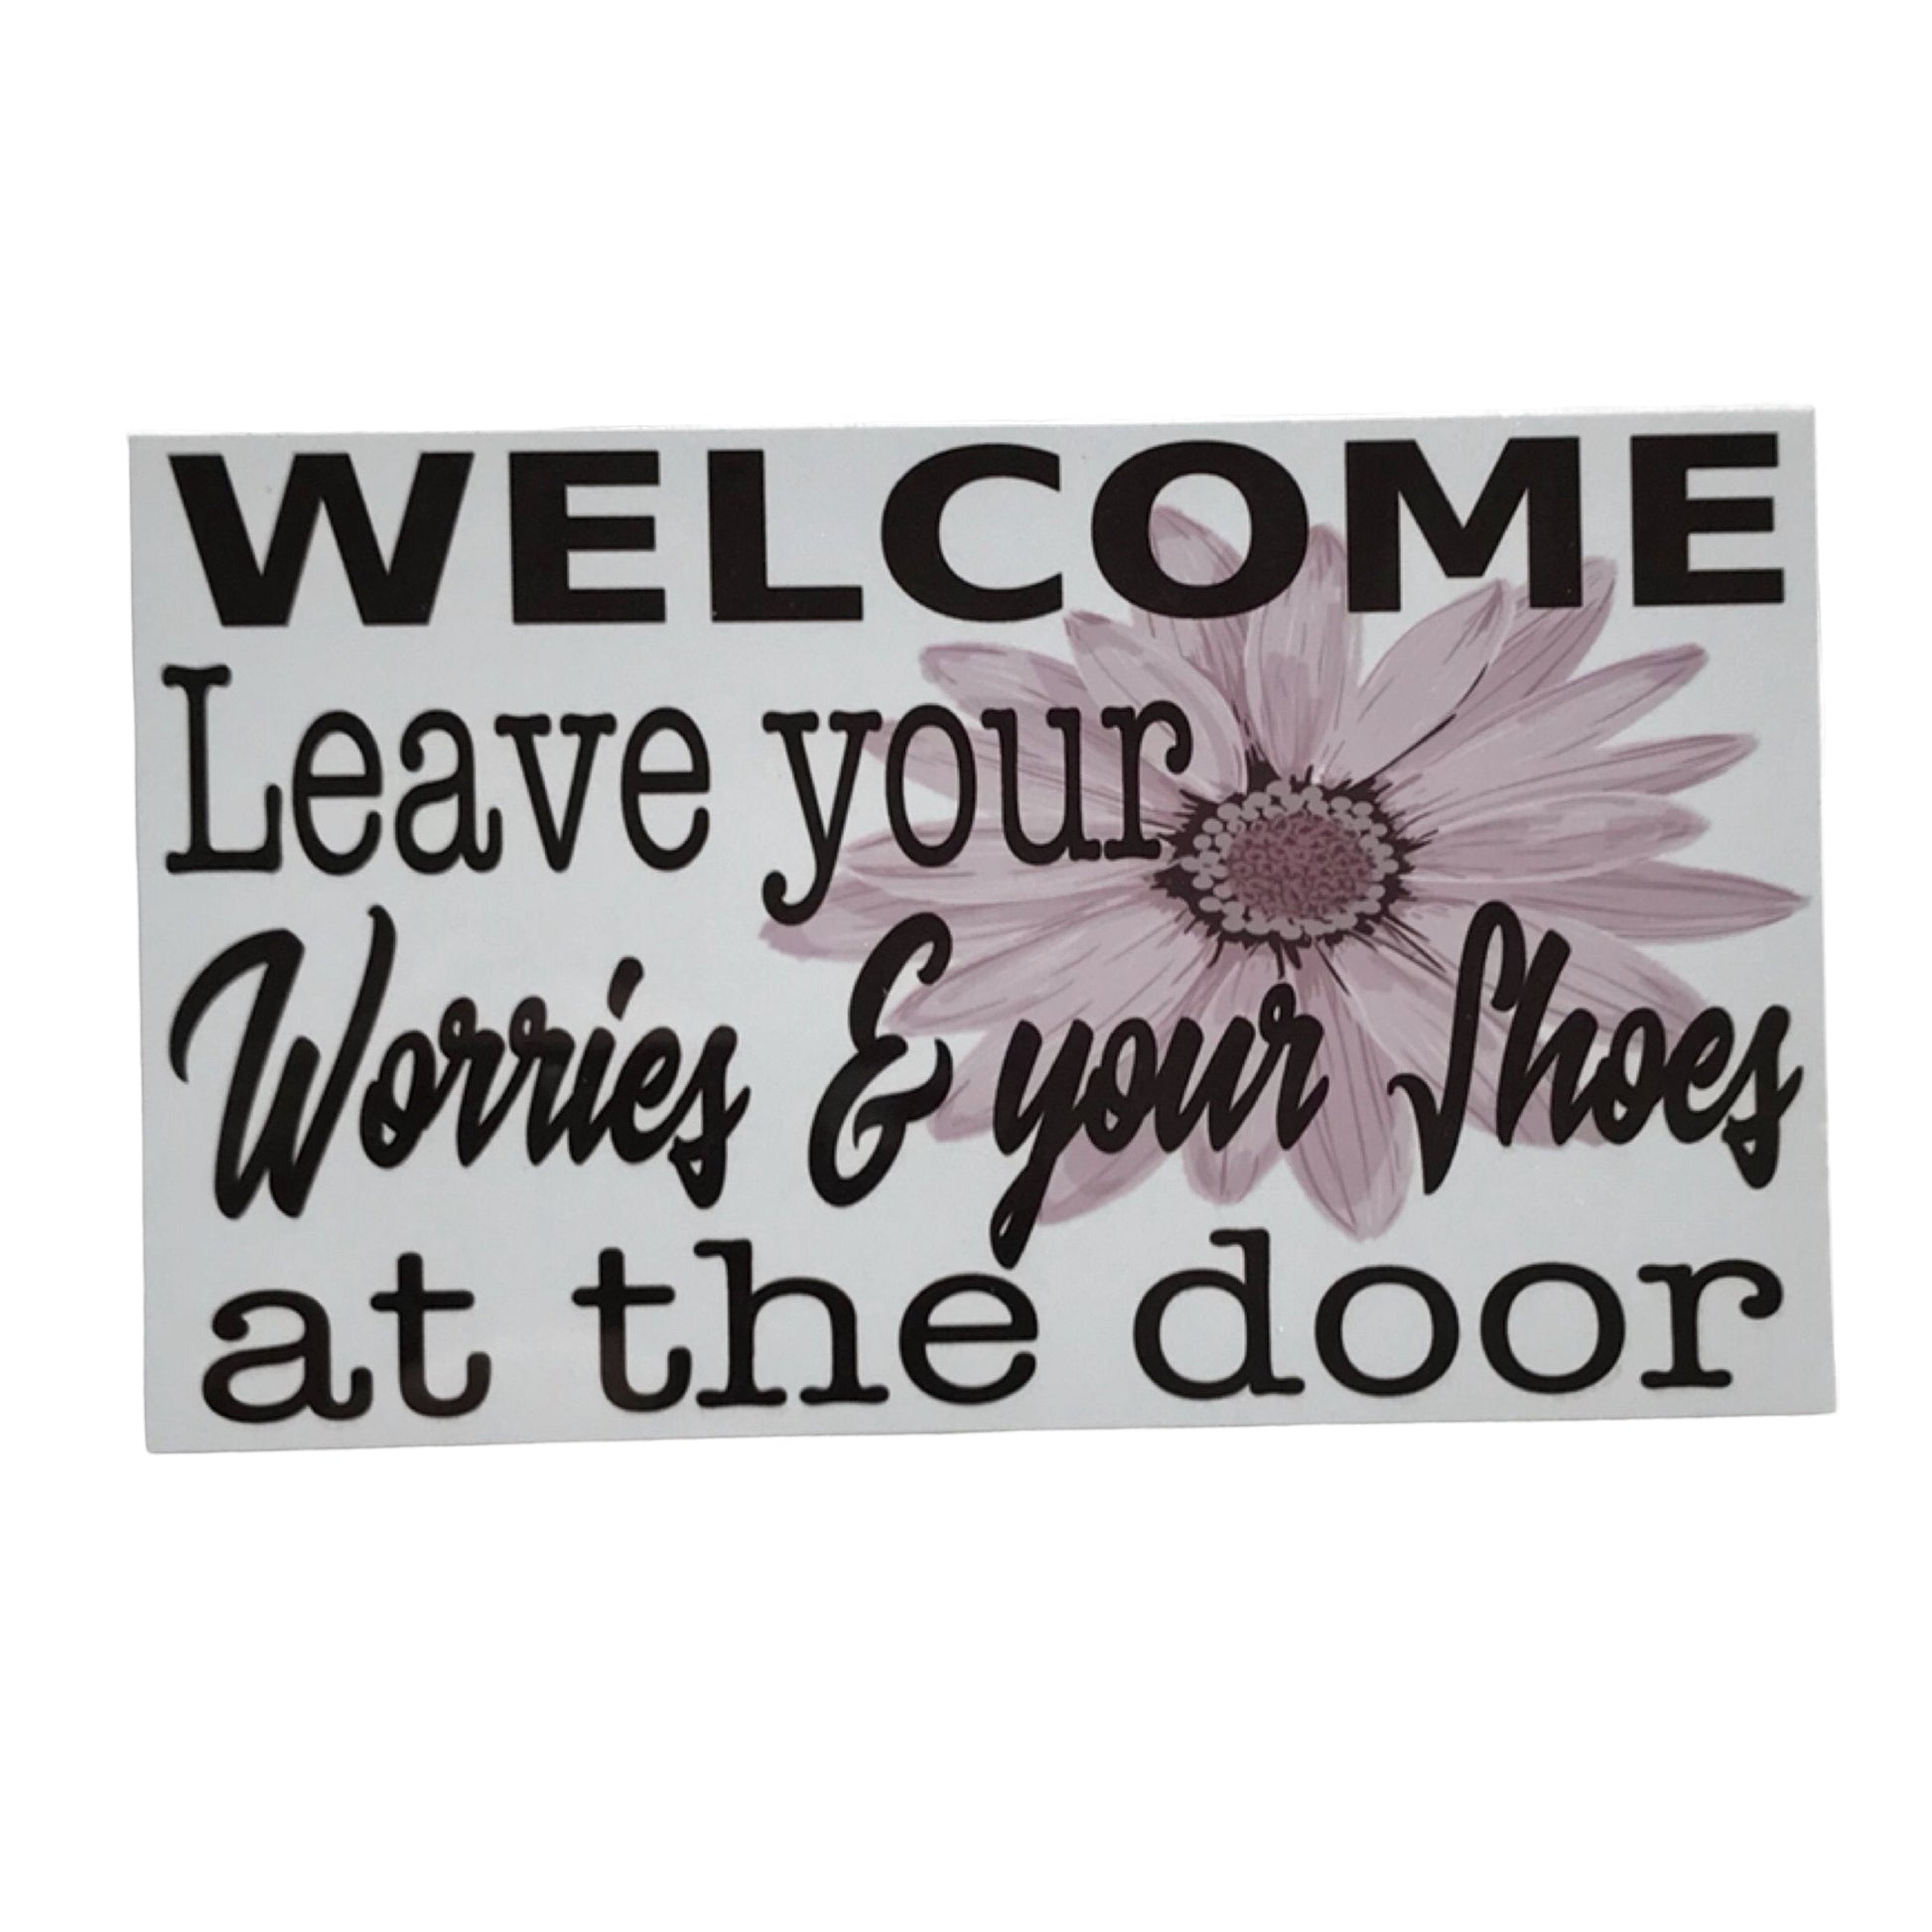 Welcome Leave Your Worries Shoes At The Door Sign - The Renmy Store Homewares & Gifts 